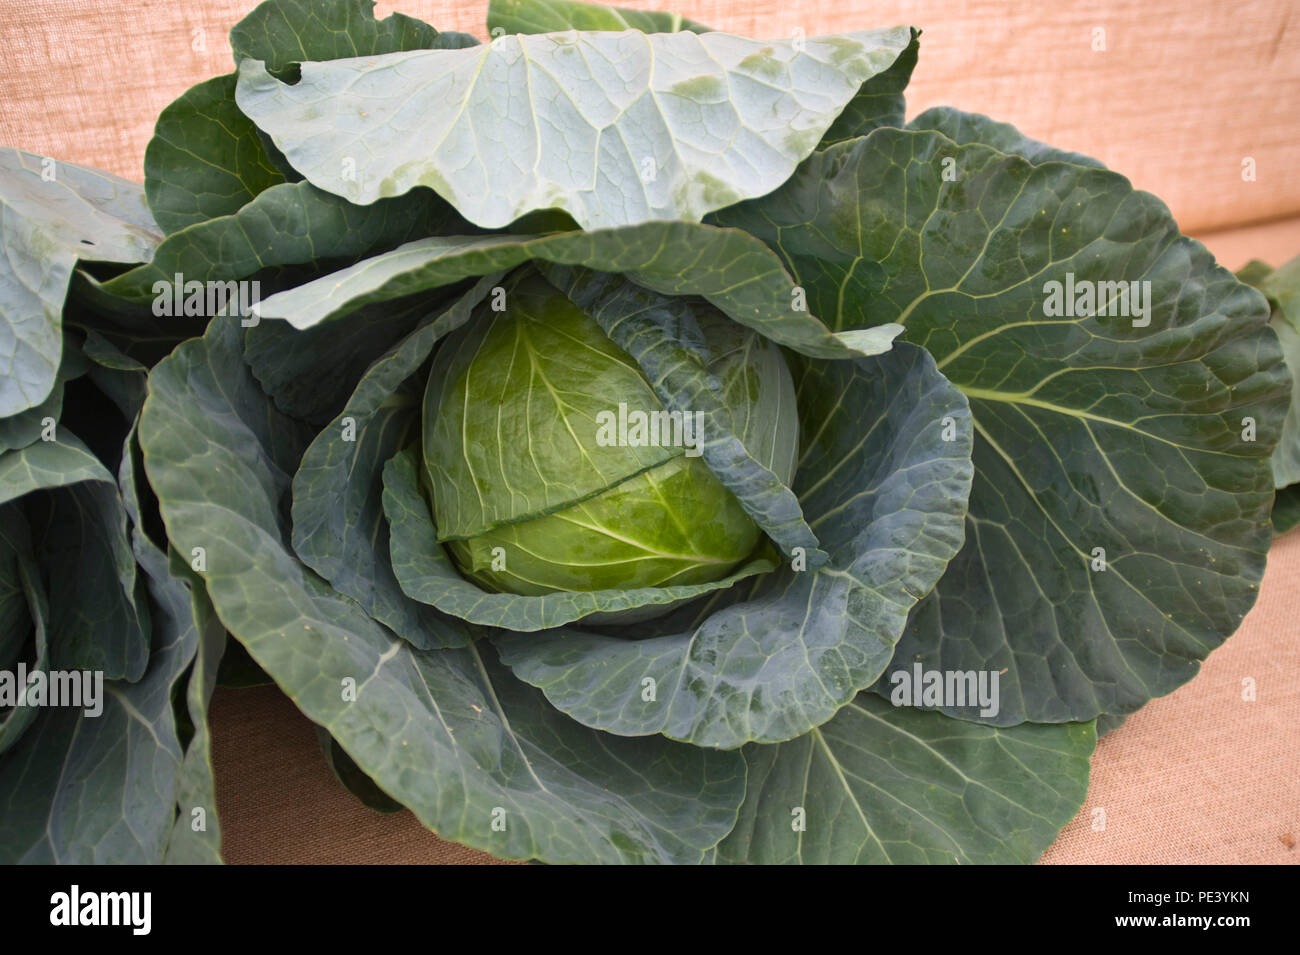 Cabbage exhibited at RHS Tatton Park flower show Cheshire England UK Stock Photo